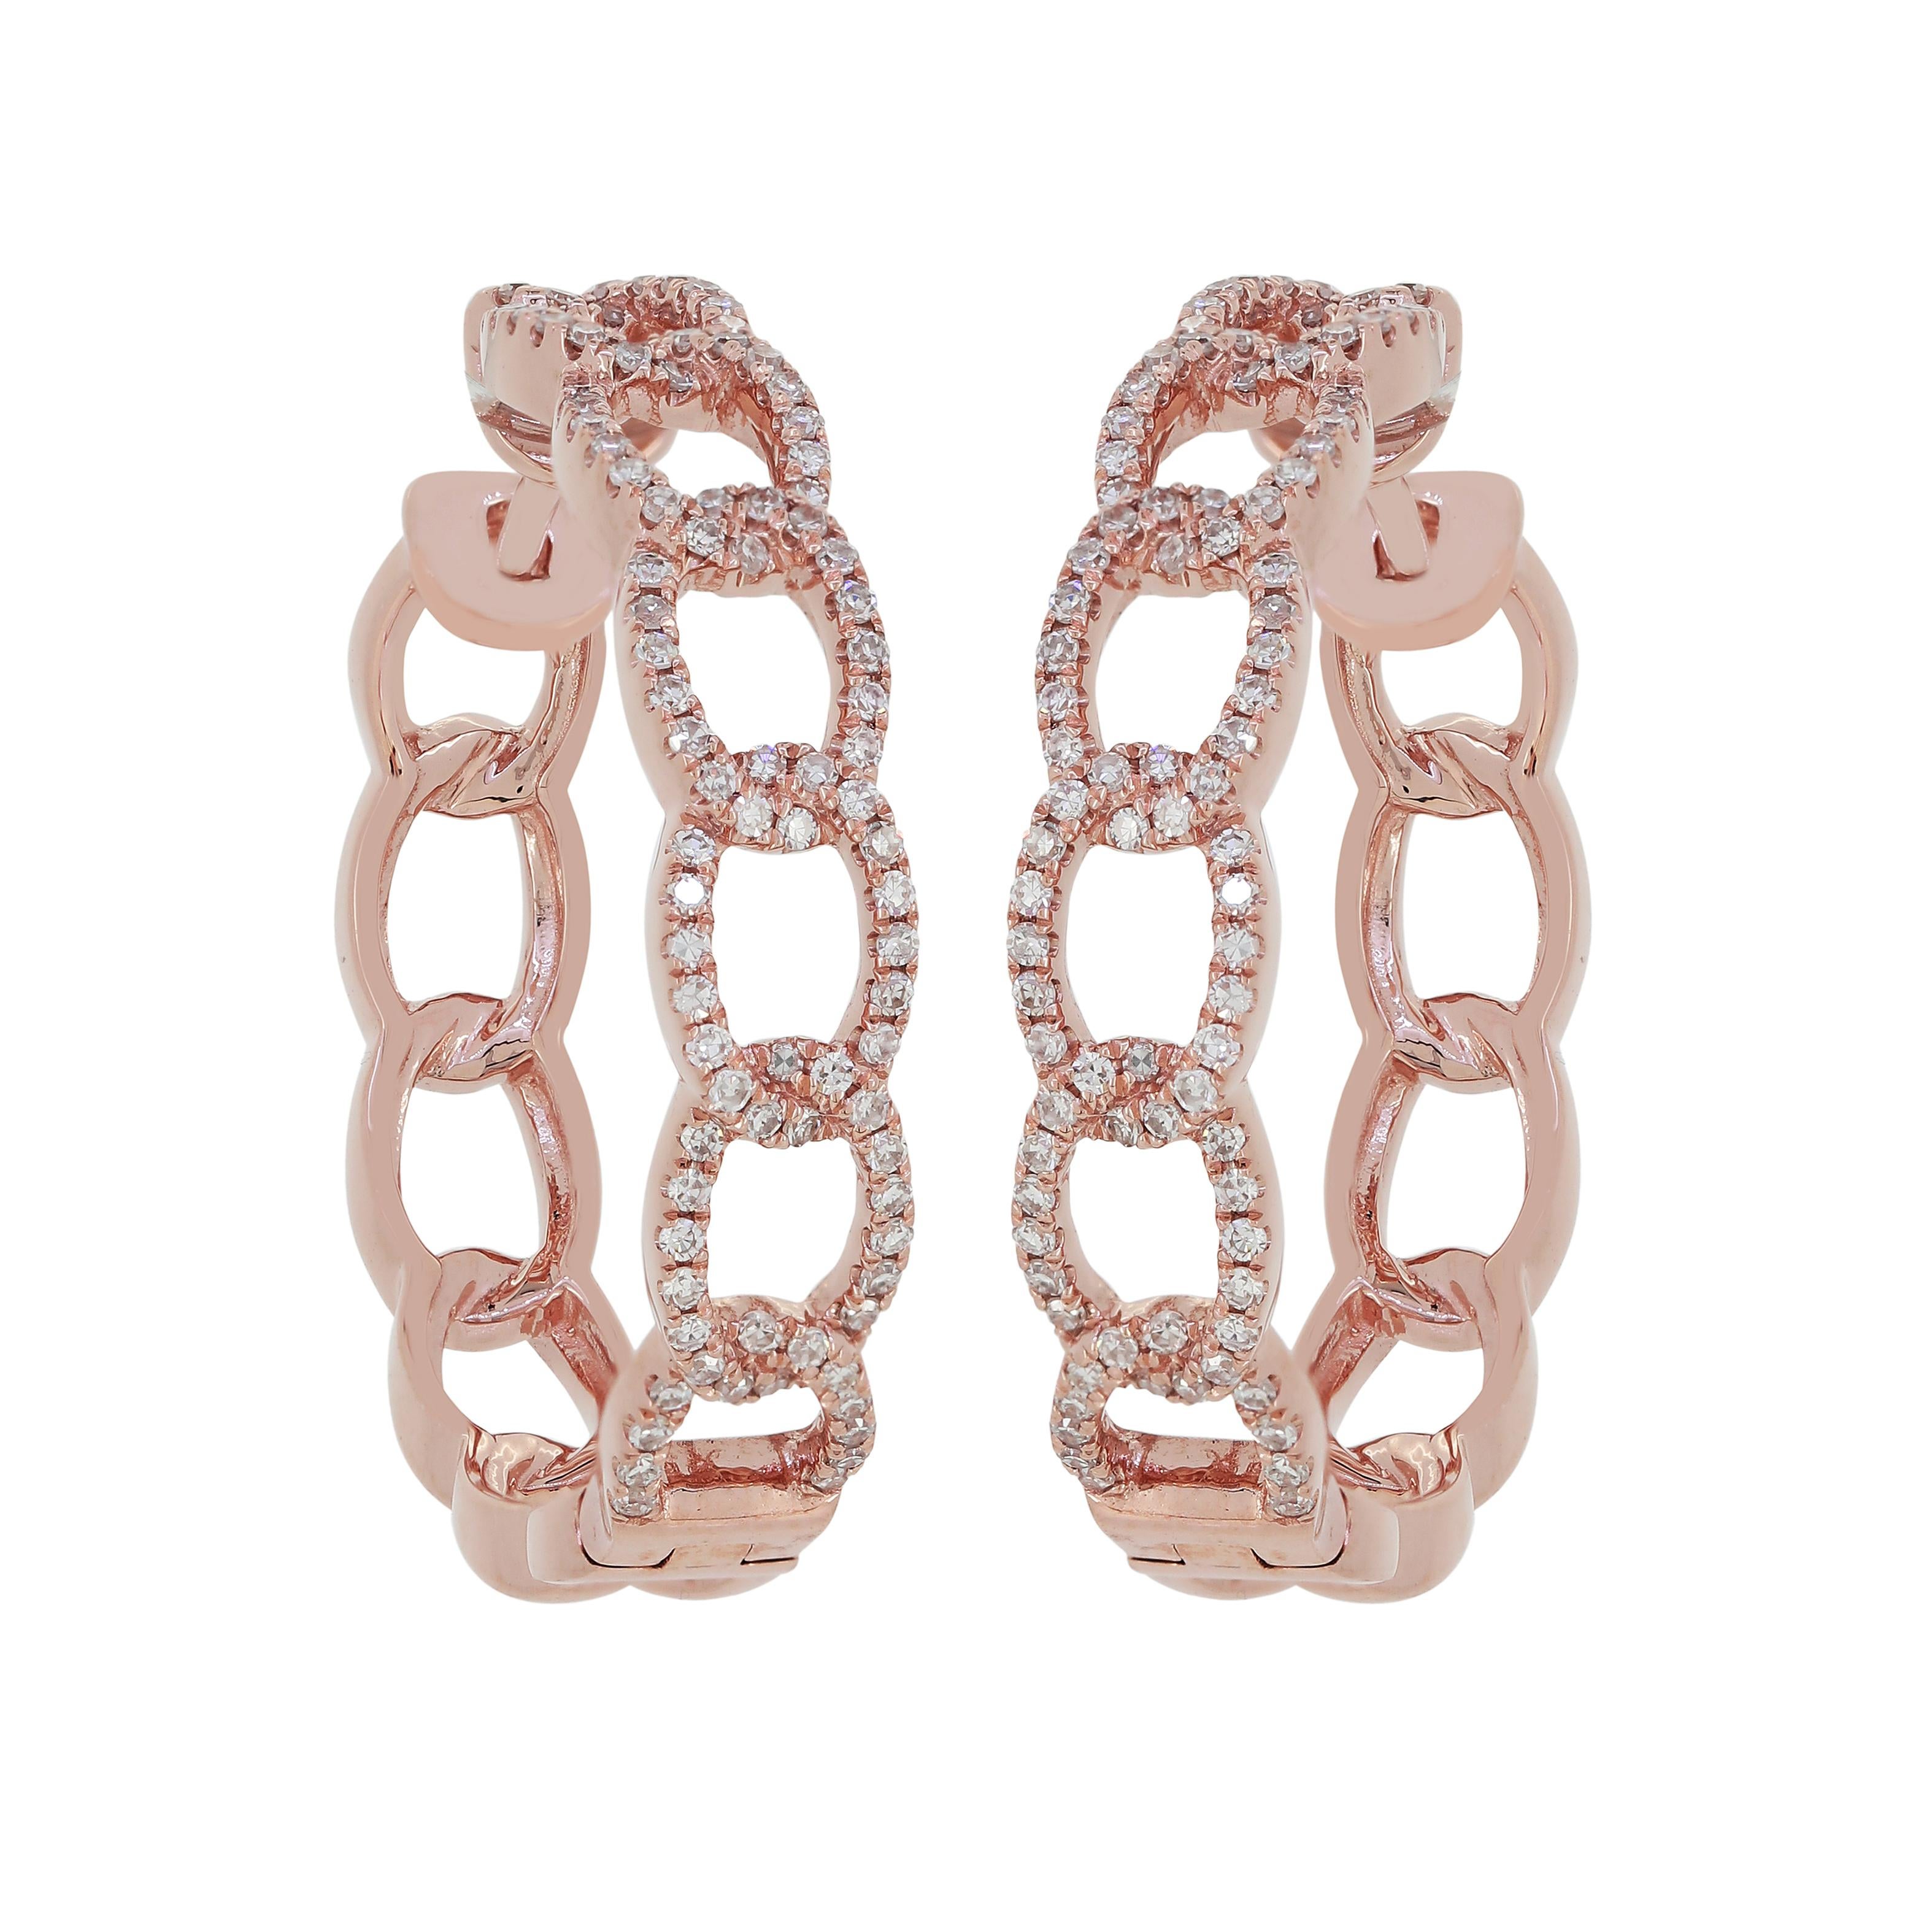 These Luxle hoops boast a design of intertwined linked frames in 18K rose gold. Each pair is embellished with 190 pave round diamonds. They have huggie backs.

Please follow the Luxury Jewels storefront to view the latest collections & exclusive one